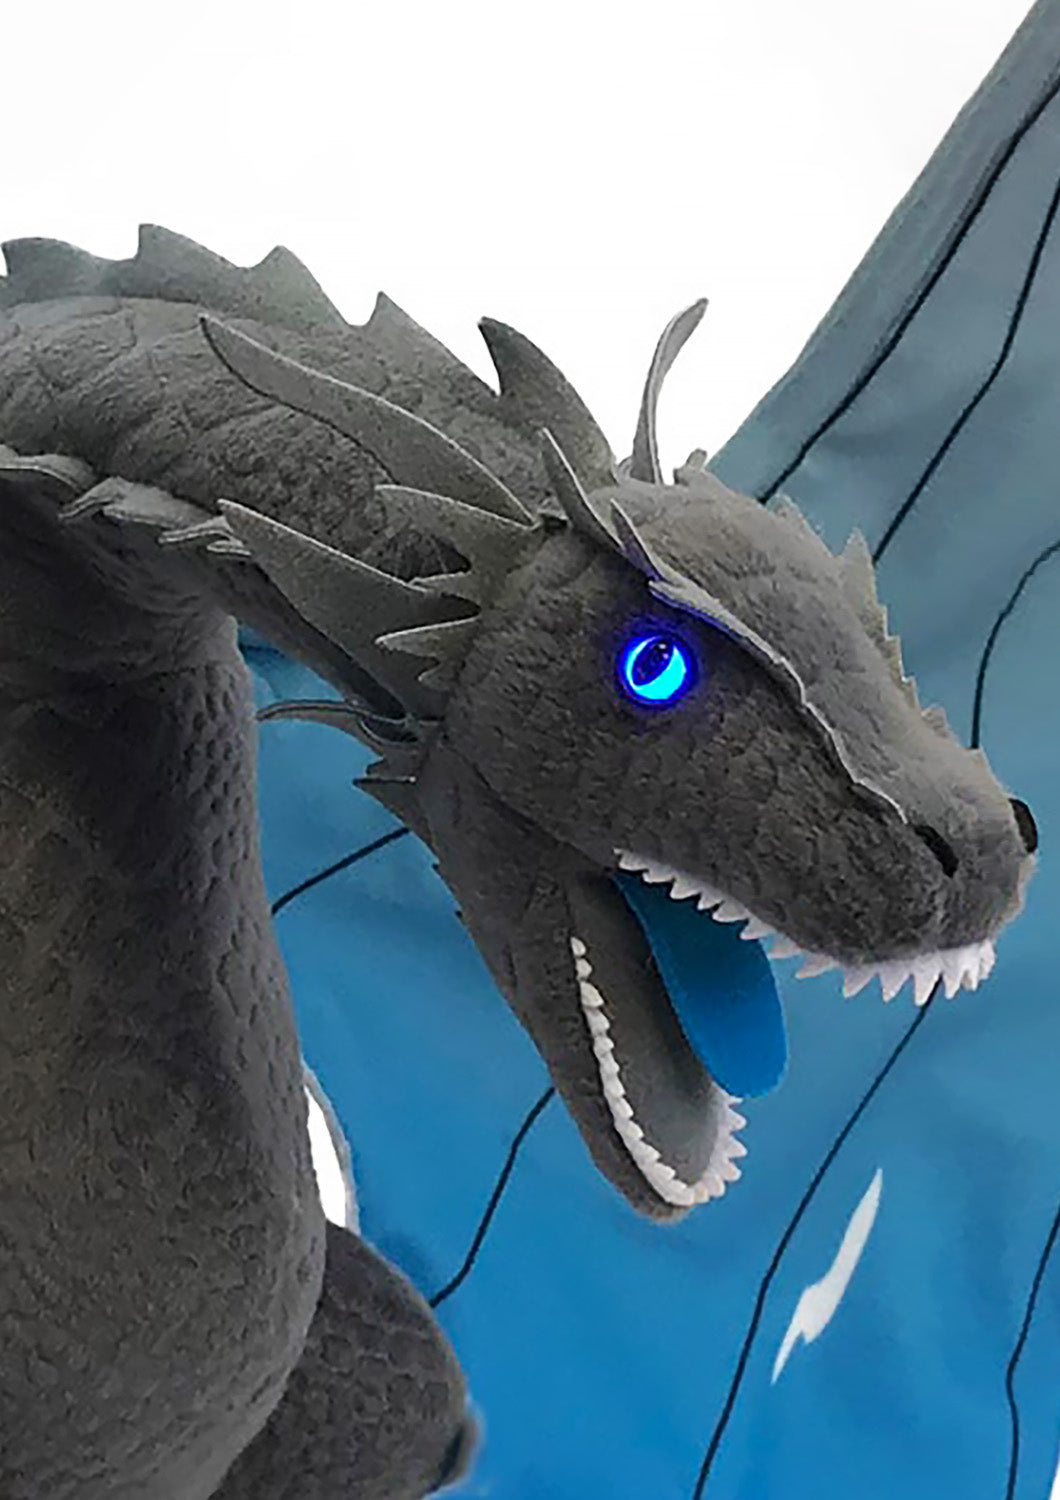 FACTORY ENTERTAINMENT GAME OF THRONES VISERION ICE DRAGON PLUSH LARGE WITH LIGHT-UP EYES - 408816 - Anotoys Collectibles